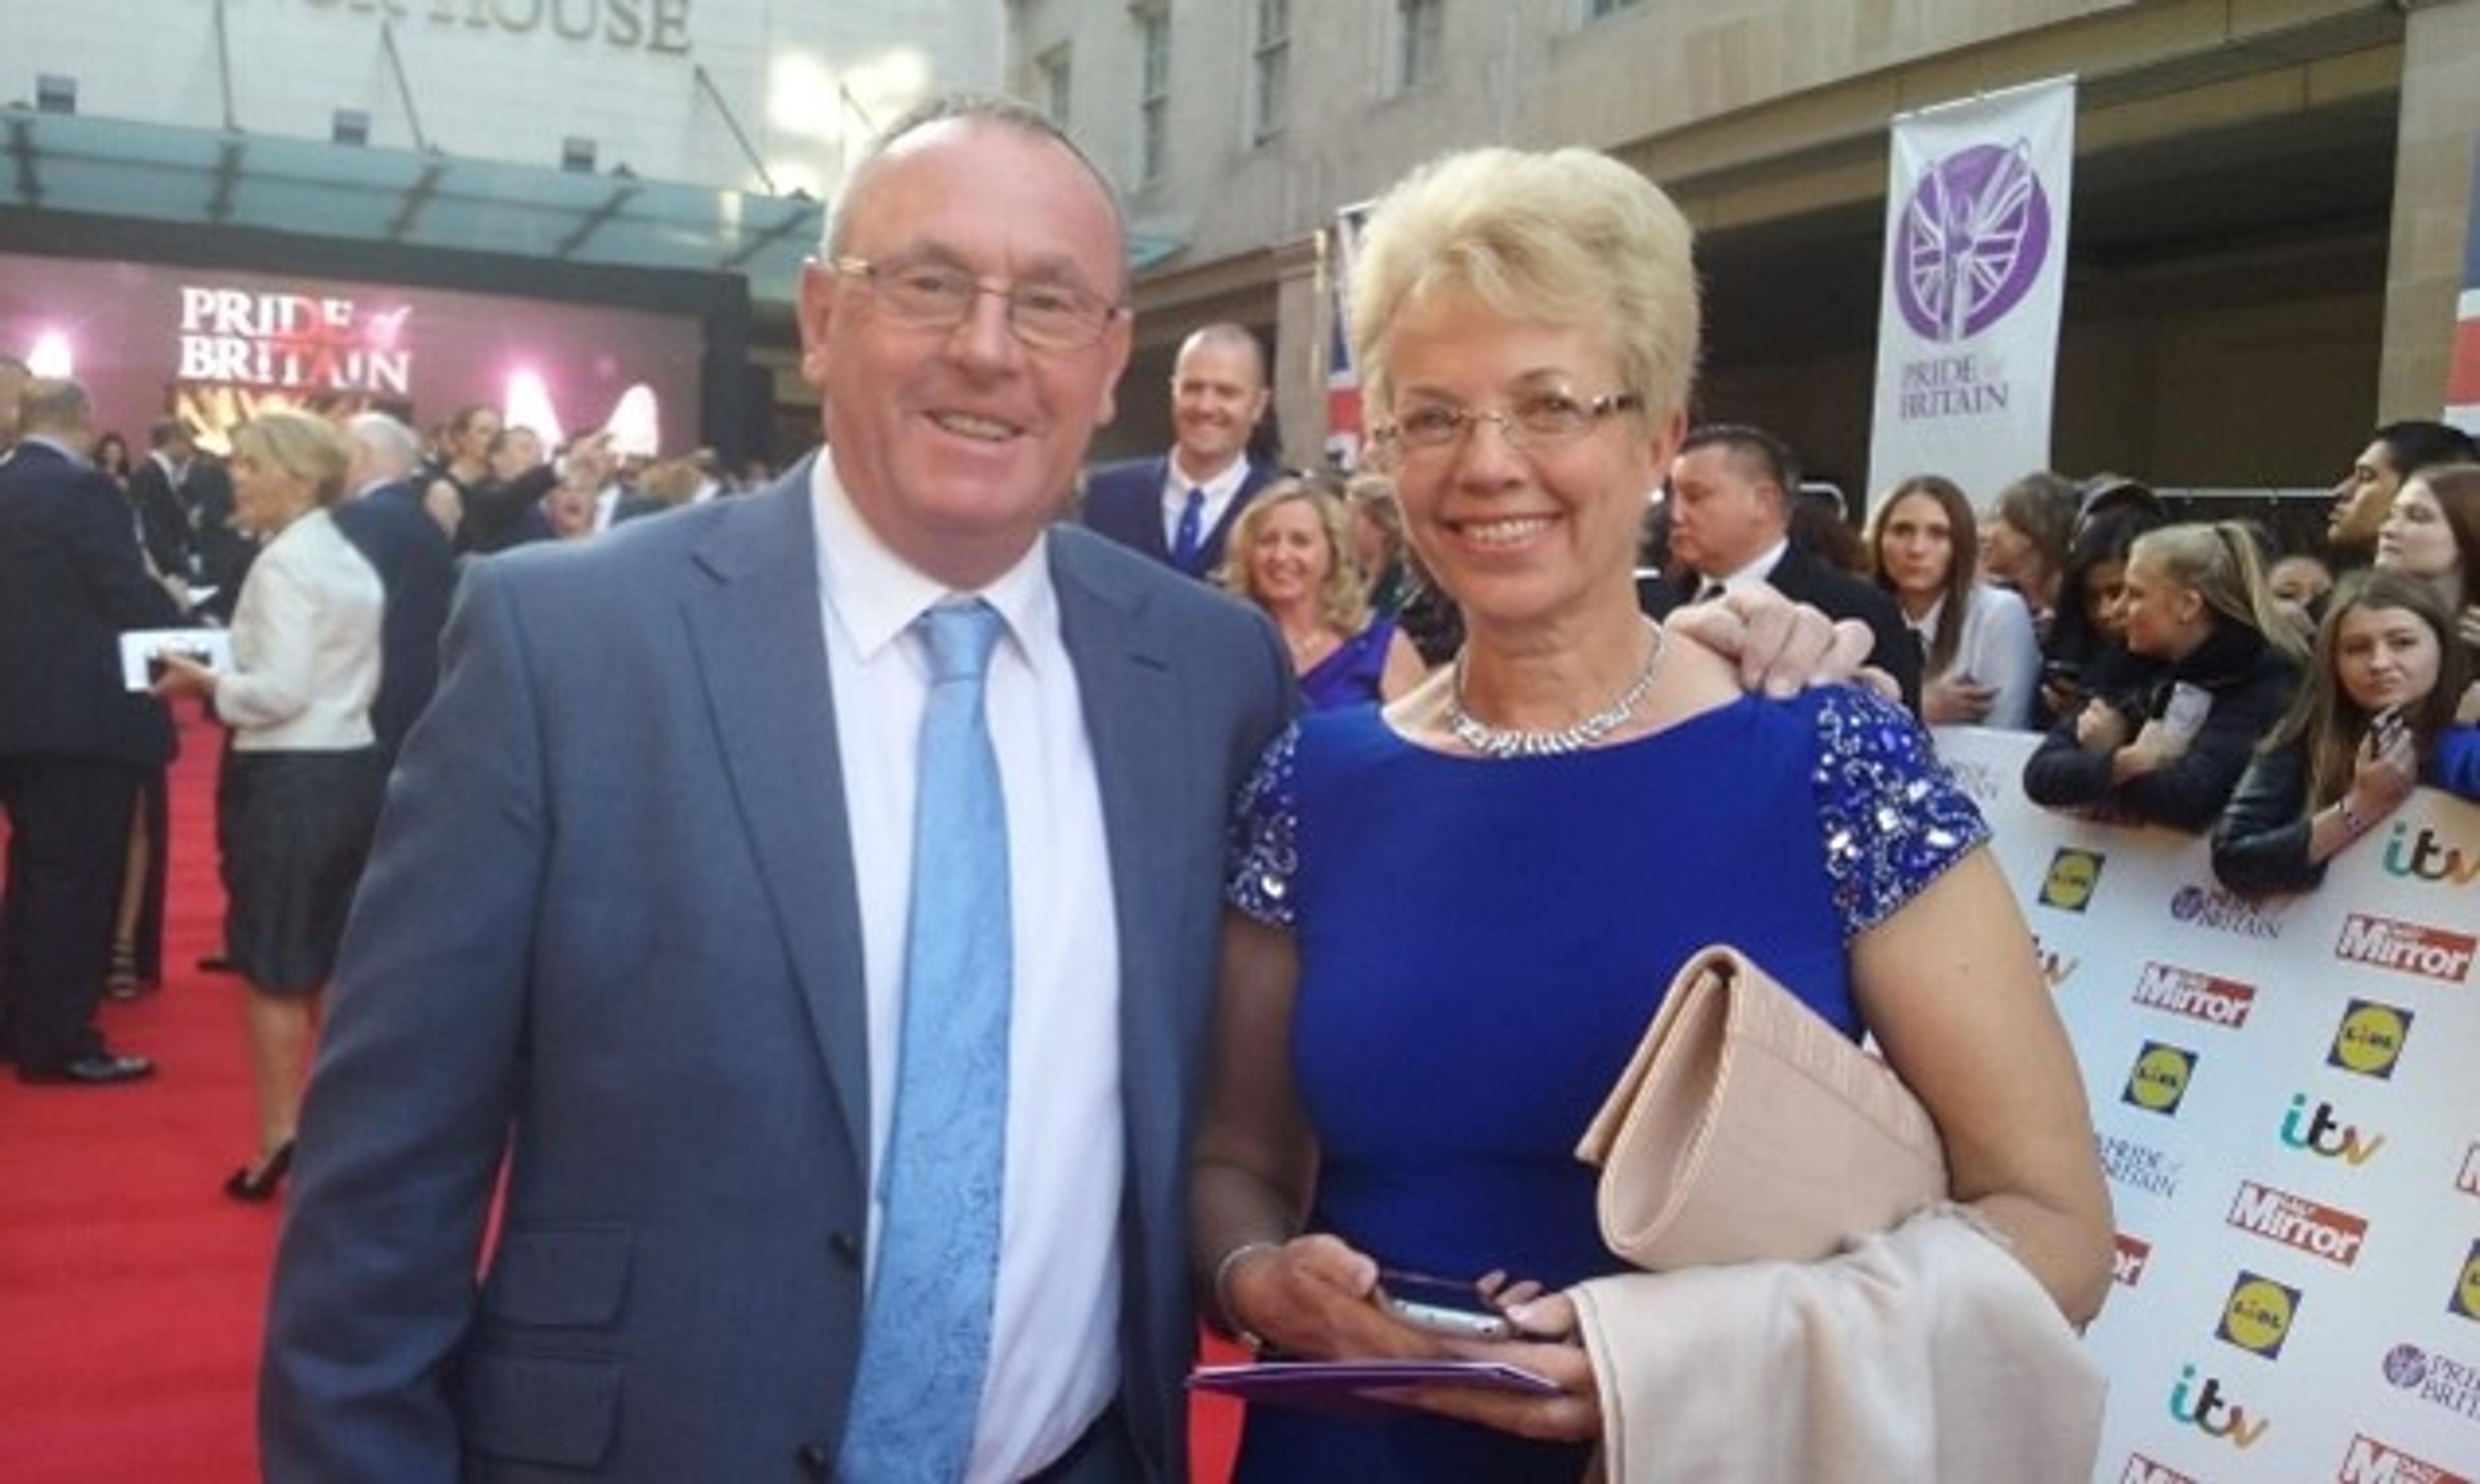 John Price, a patron of Weston Park Cancer Charity, and his wife, Anne Price, stand facing the camera in front of a crowd of people at the Pride of Britain Awards.